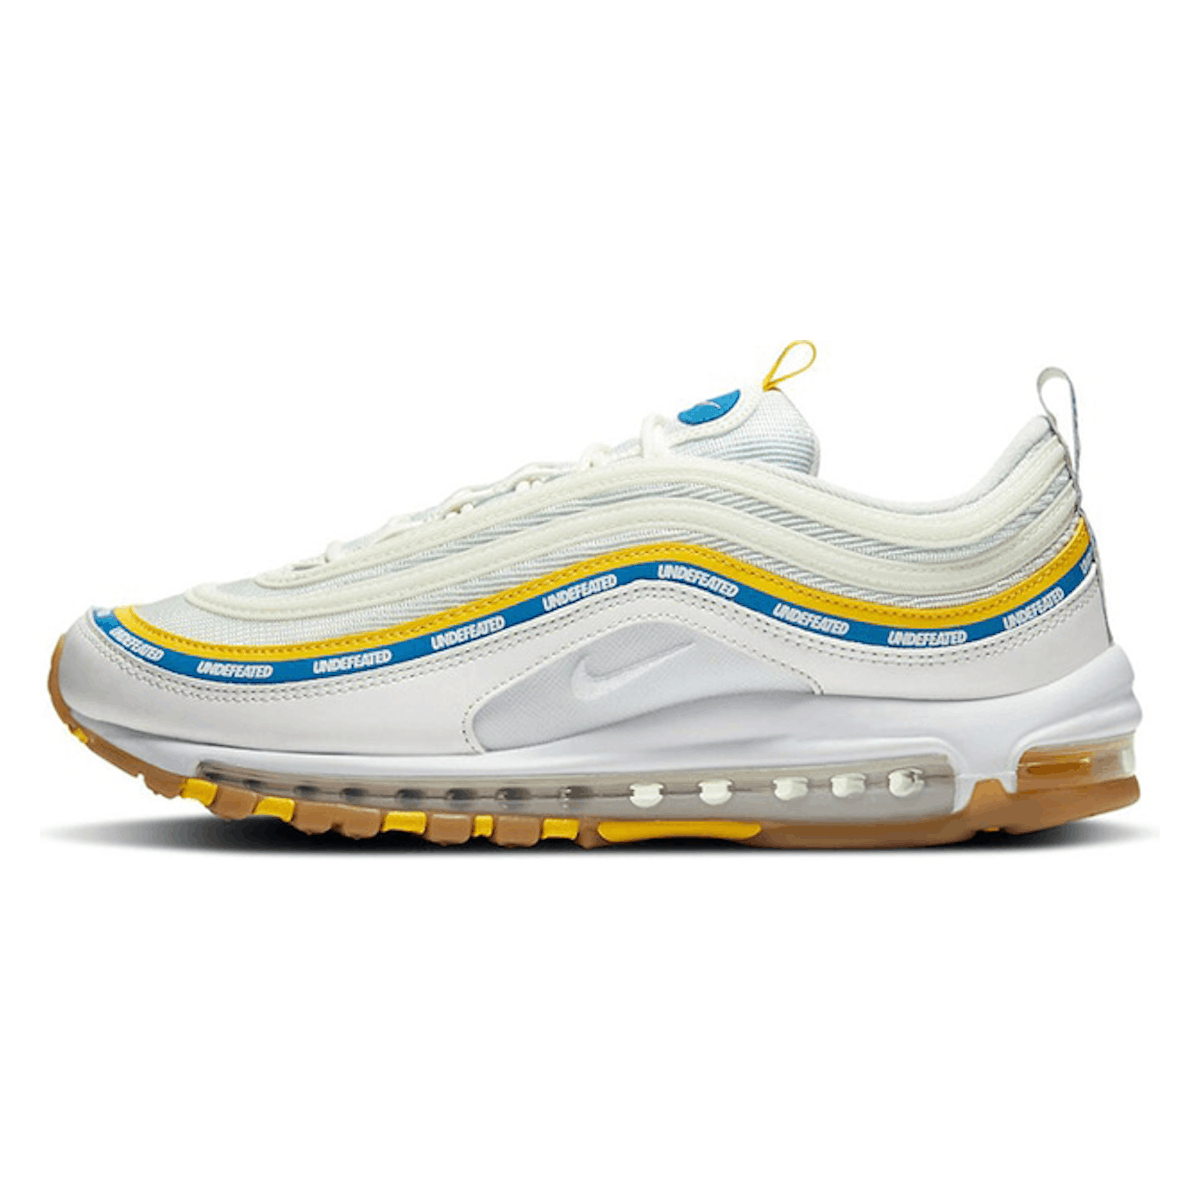 UNDEFEATED x Nike Air Max 97 "White"